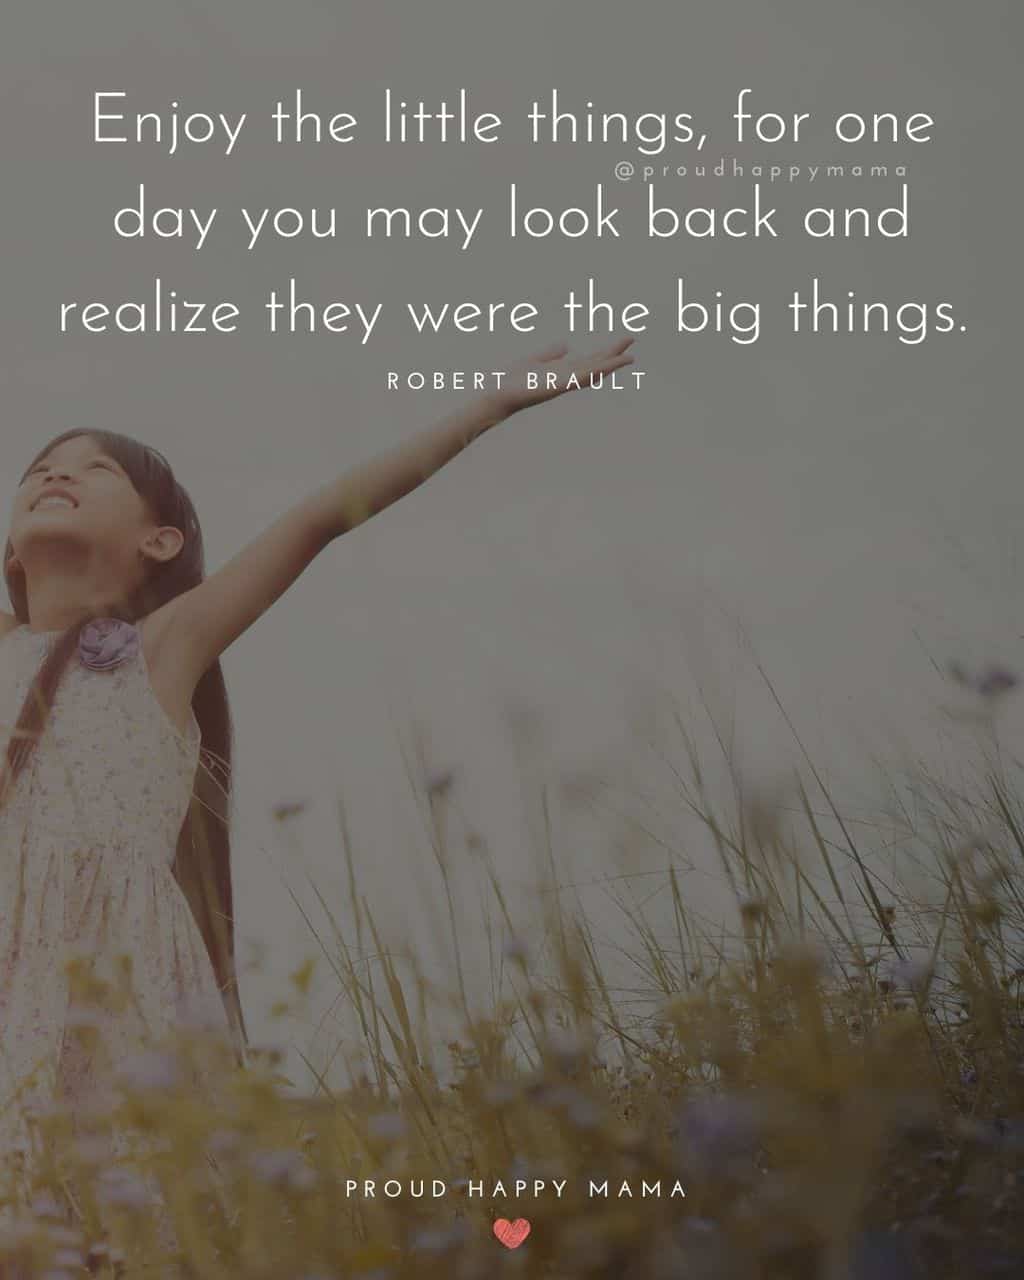 Childhood Quotes - Enjoy the little things, for one day you may look back and realize they were the big things.’ – Robert Brault